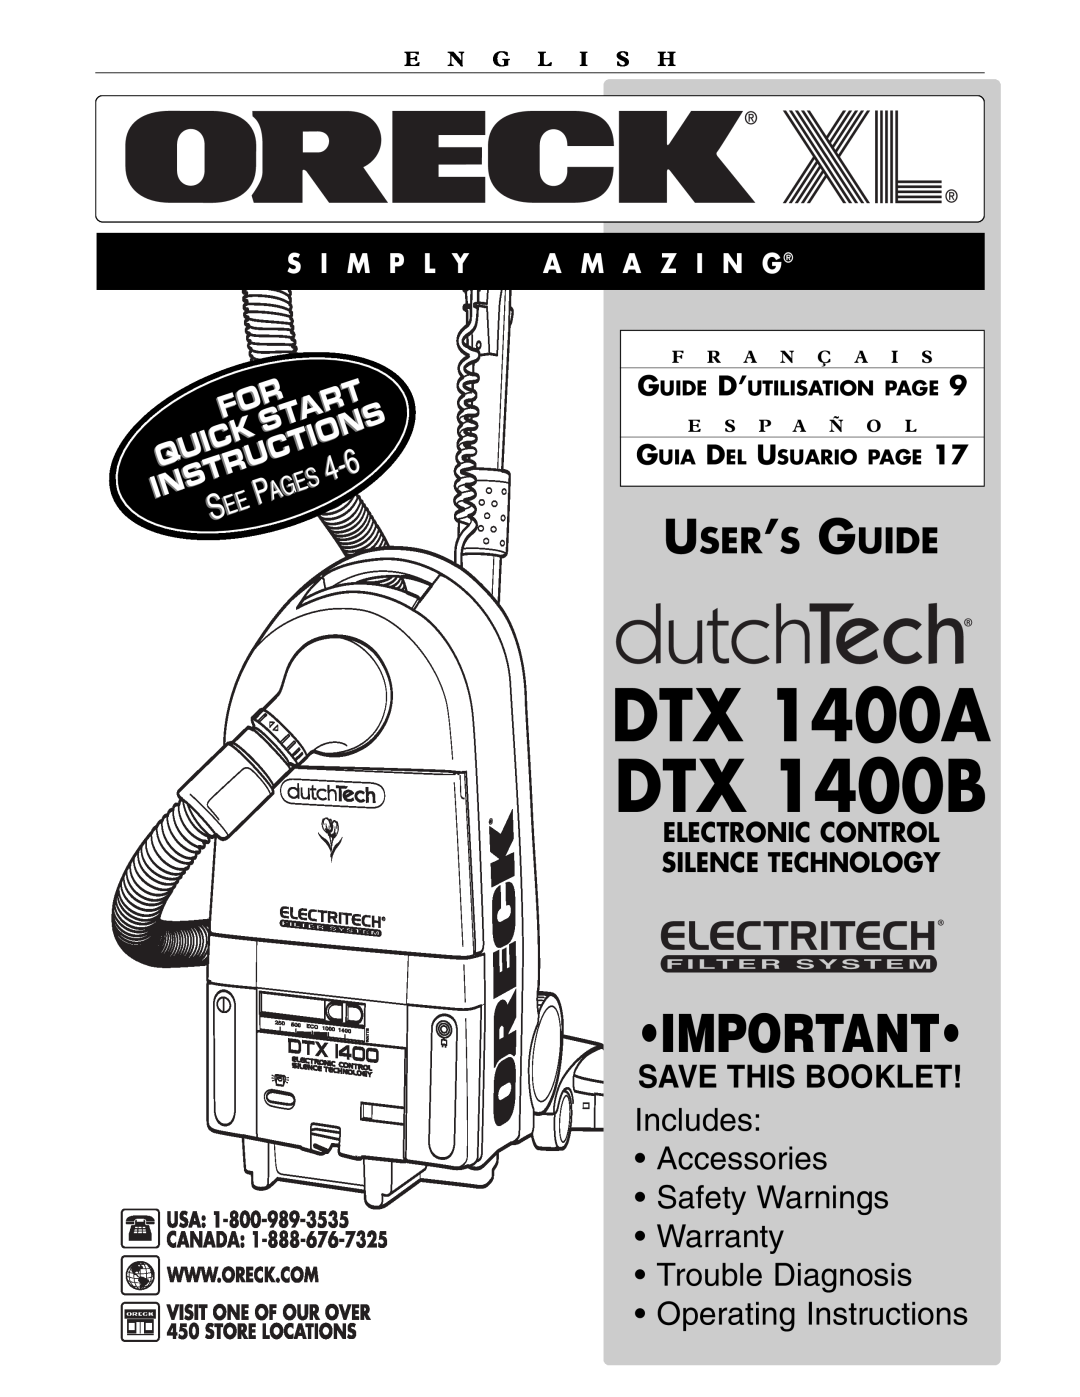 Oreck quick start DTX 1400A DTX 1400B, User’S Guide, S I M P L Y, A M A Z I N G, Electronic Control Silence Technology 